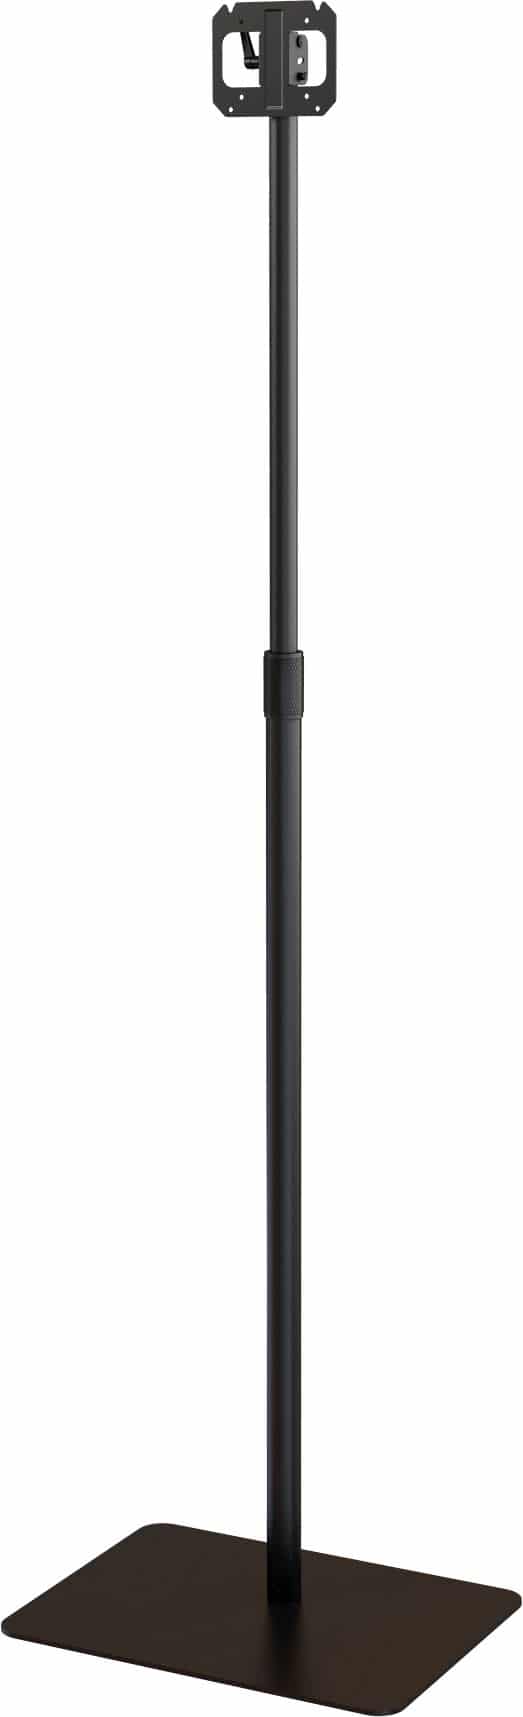 Aurora APS-1 Pole Stand For TTS Tablets